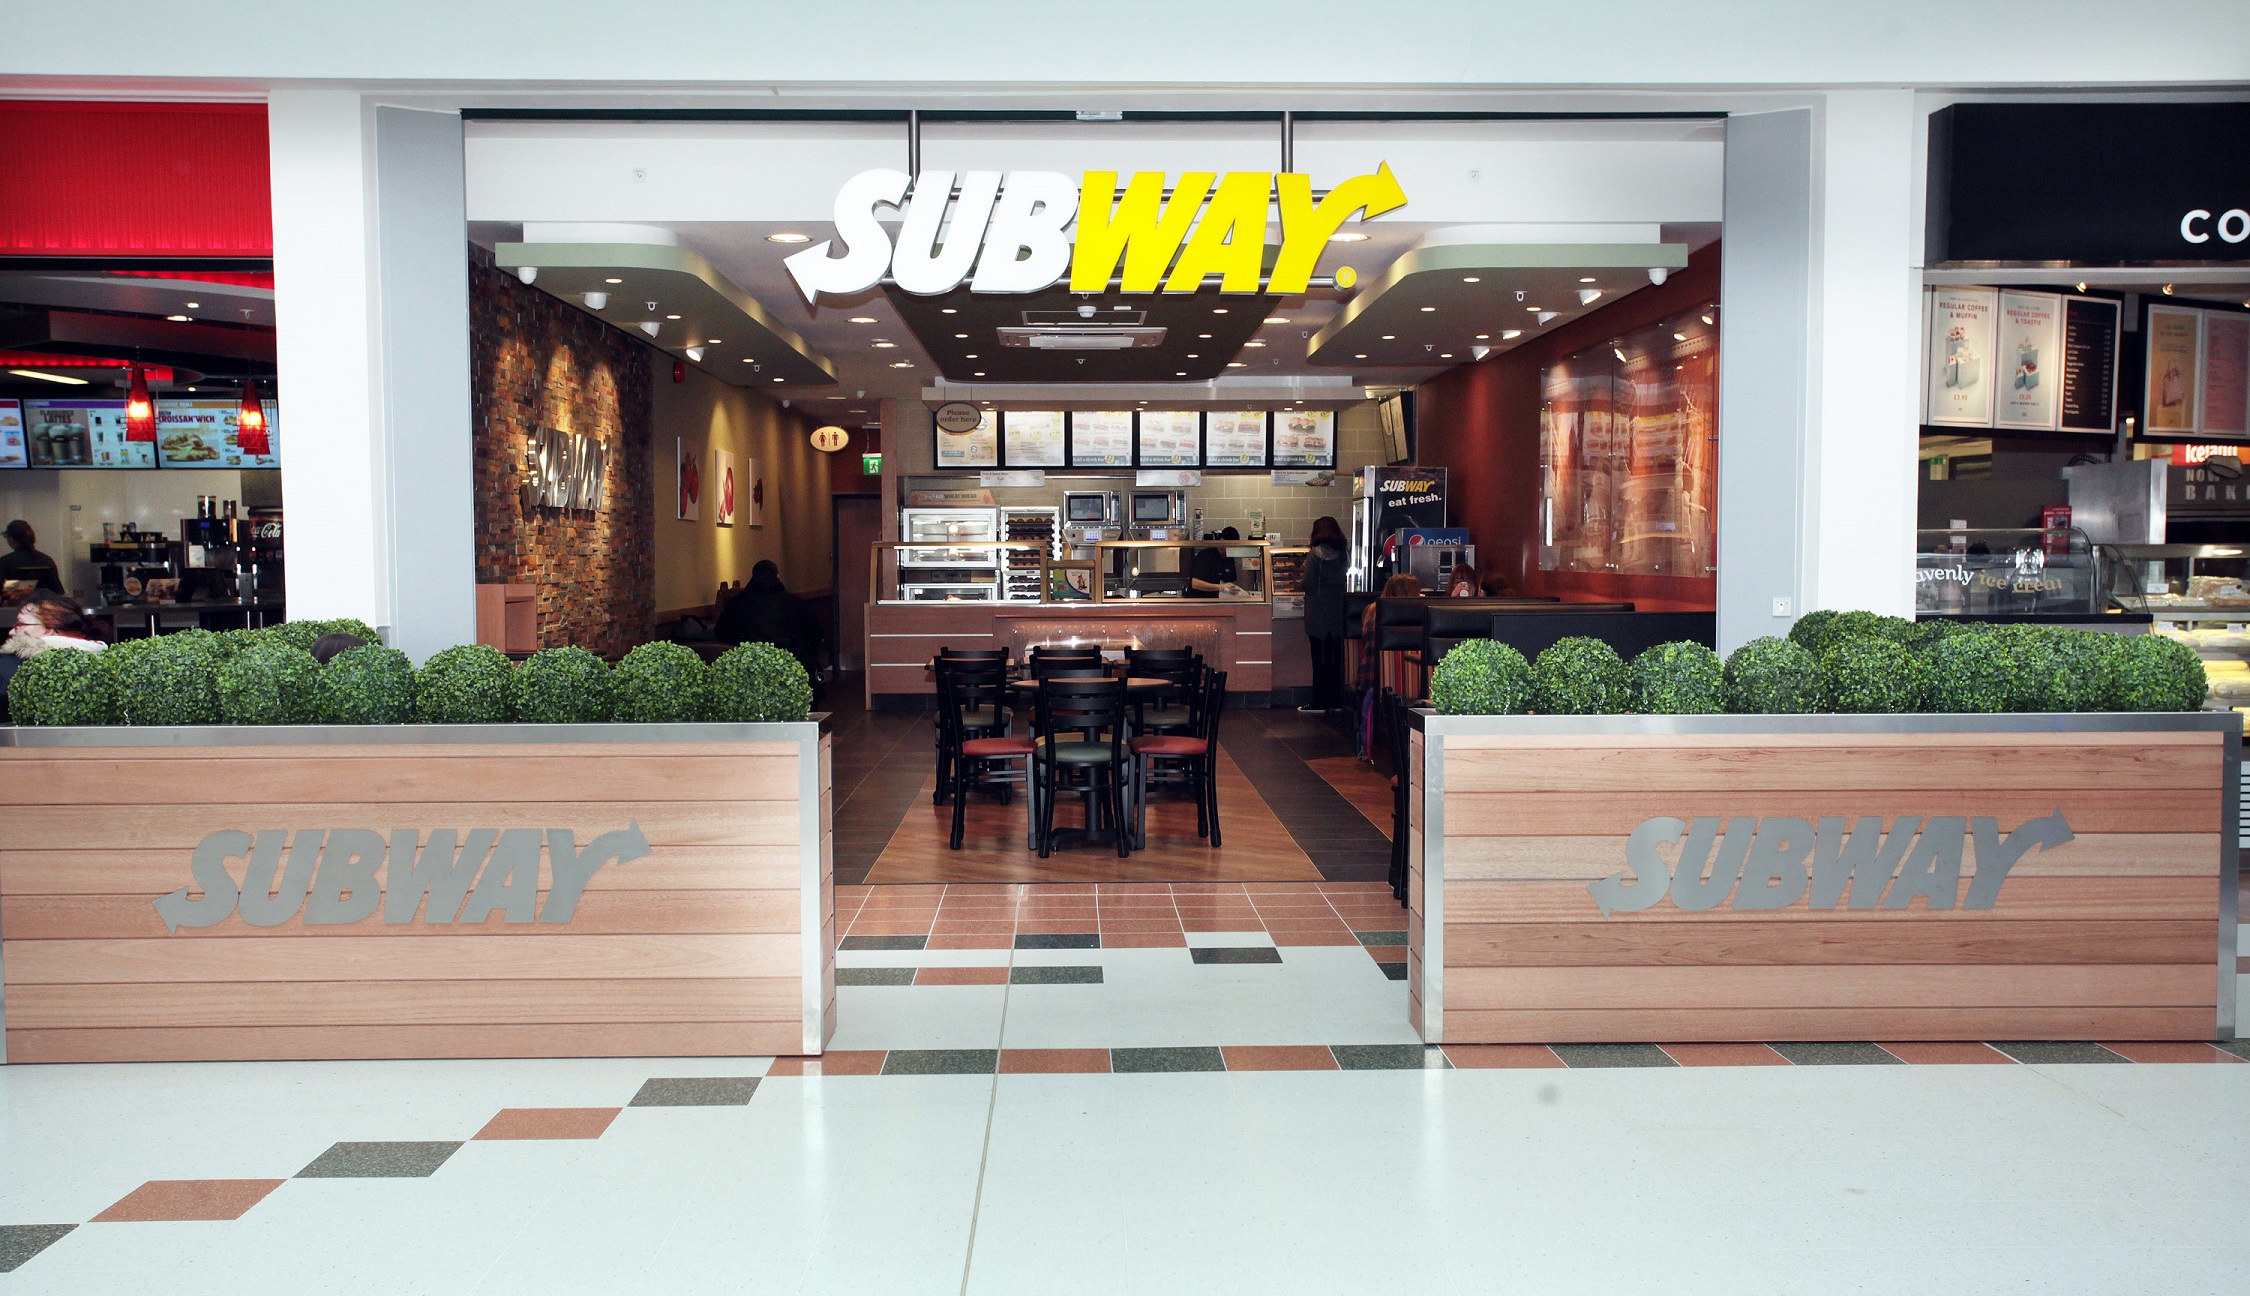 Subway_franchisee_haj_atwal_opens_the_5000th_subwayr_store_in_europe_in_livingston_scotland_1